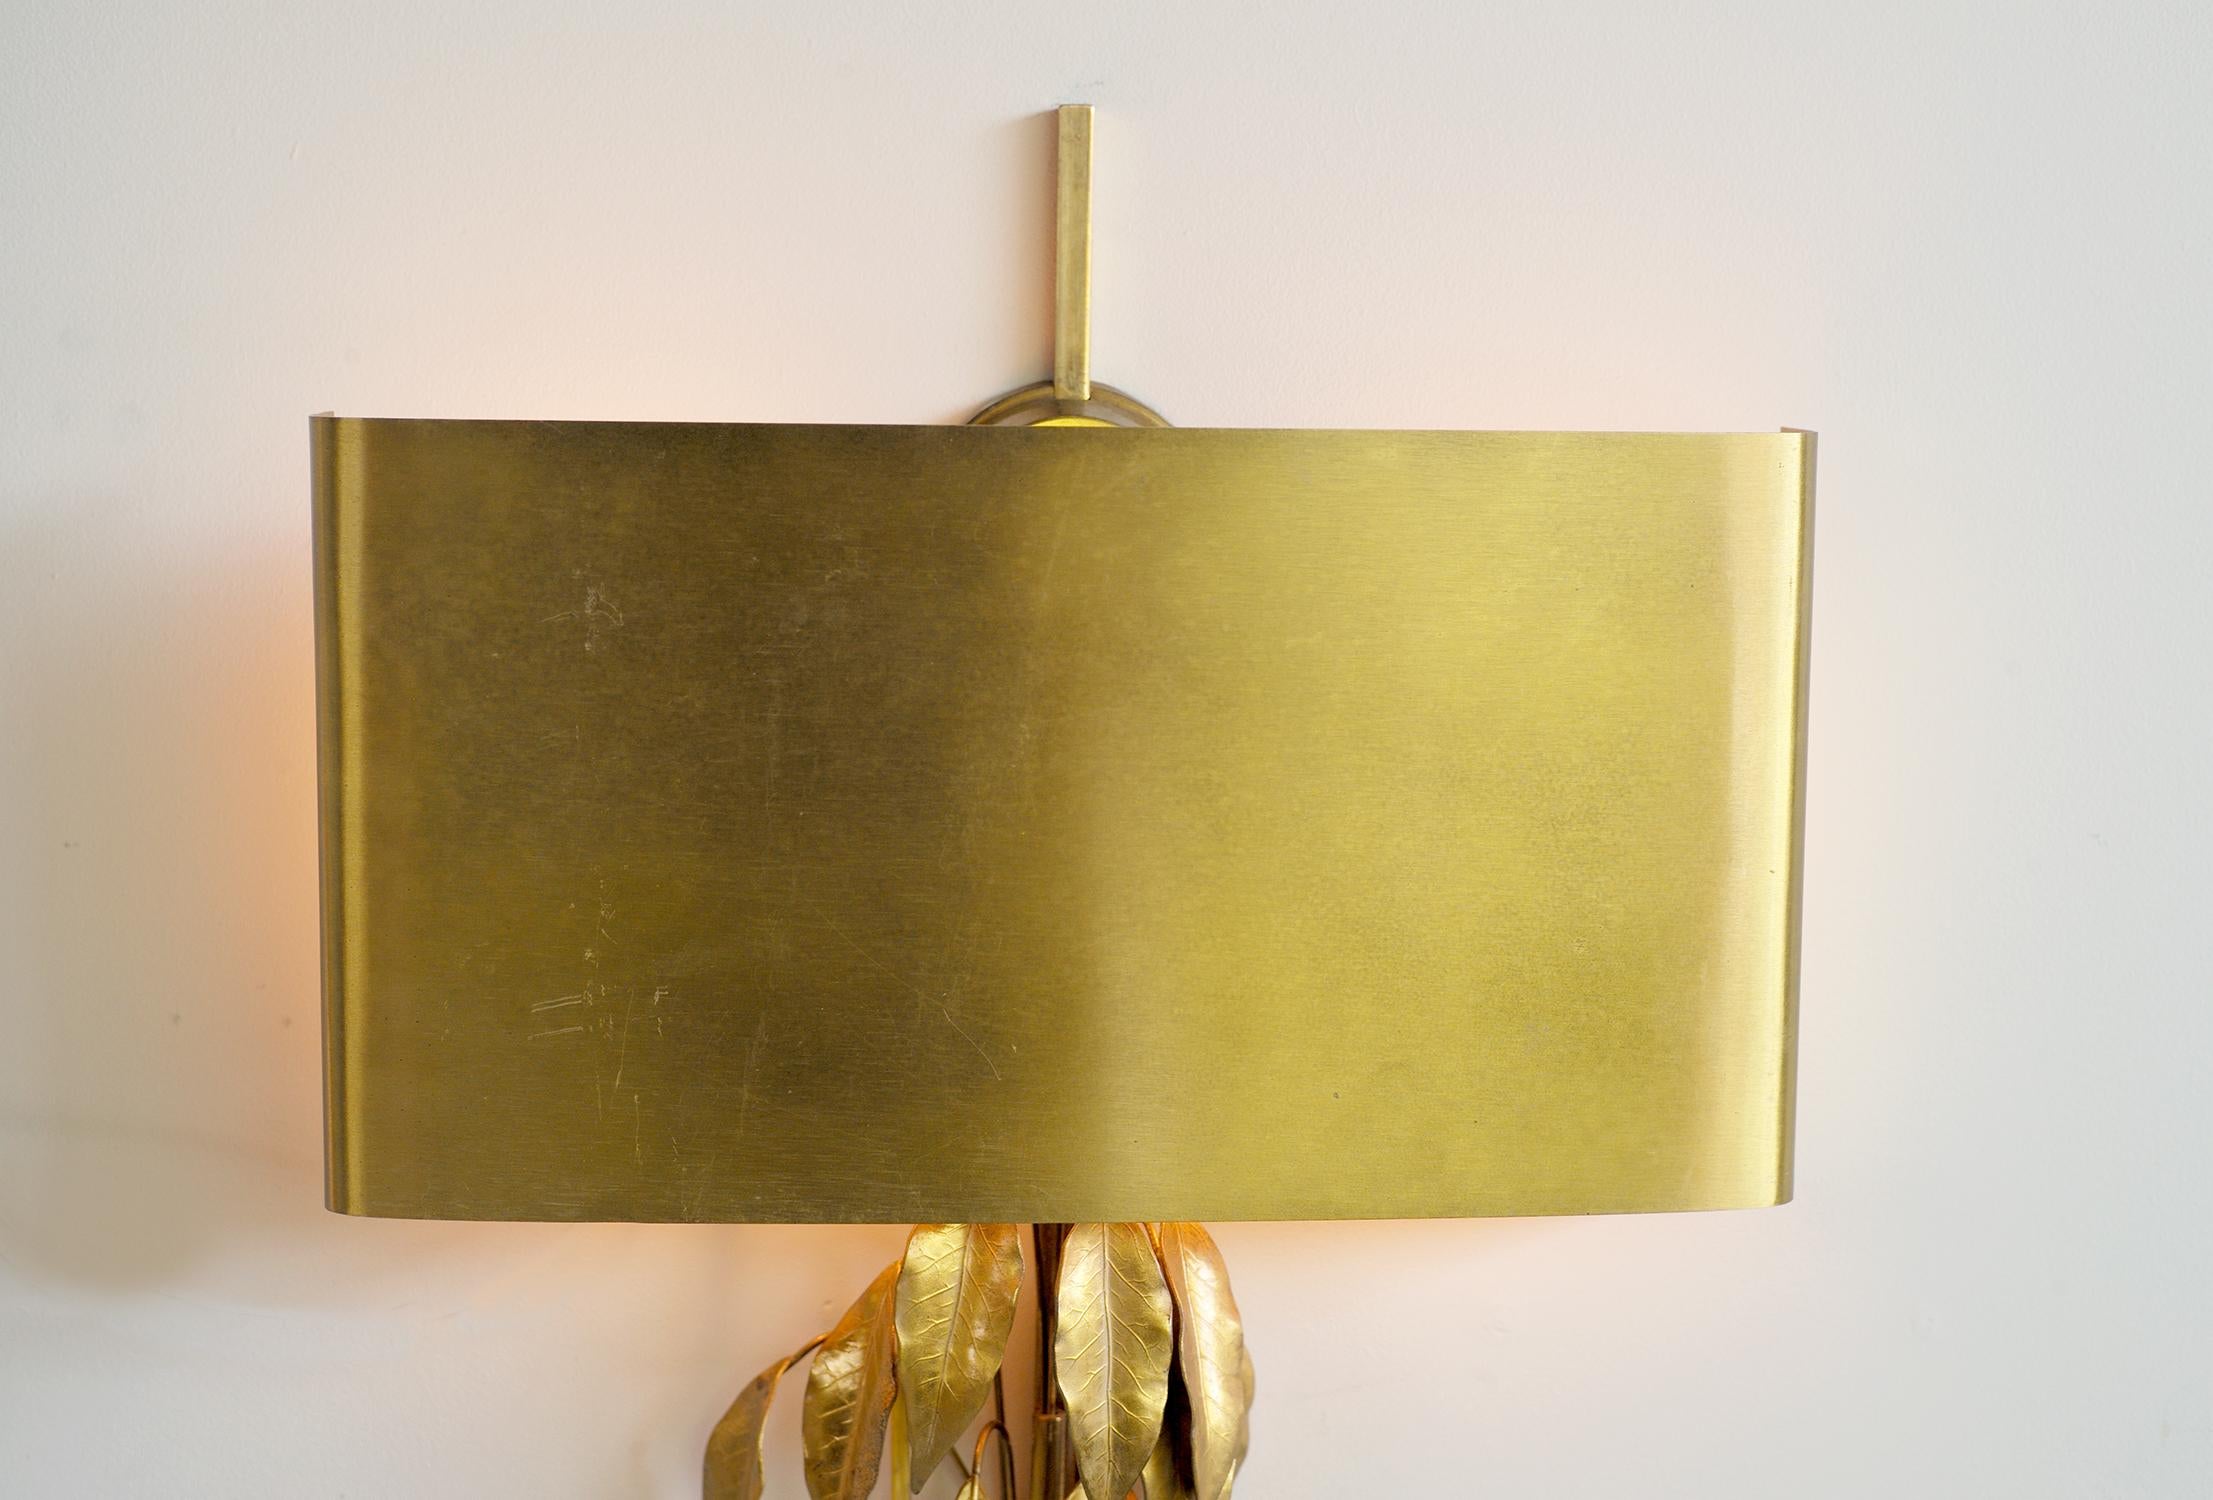 Set of two gilt brass foliage sconces, brushed brass lampshades attributed to Maison Charles, Paris 1970.
Composed of a 6-leaf wall lamp and an 8-leaf wall lamp, the first model being 44cm high by 26cm wide, the second 49.5 cm by 31.3 cm. Very nice